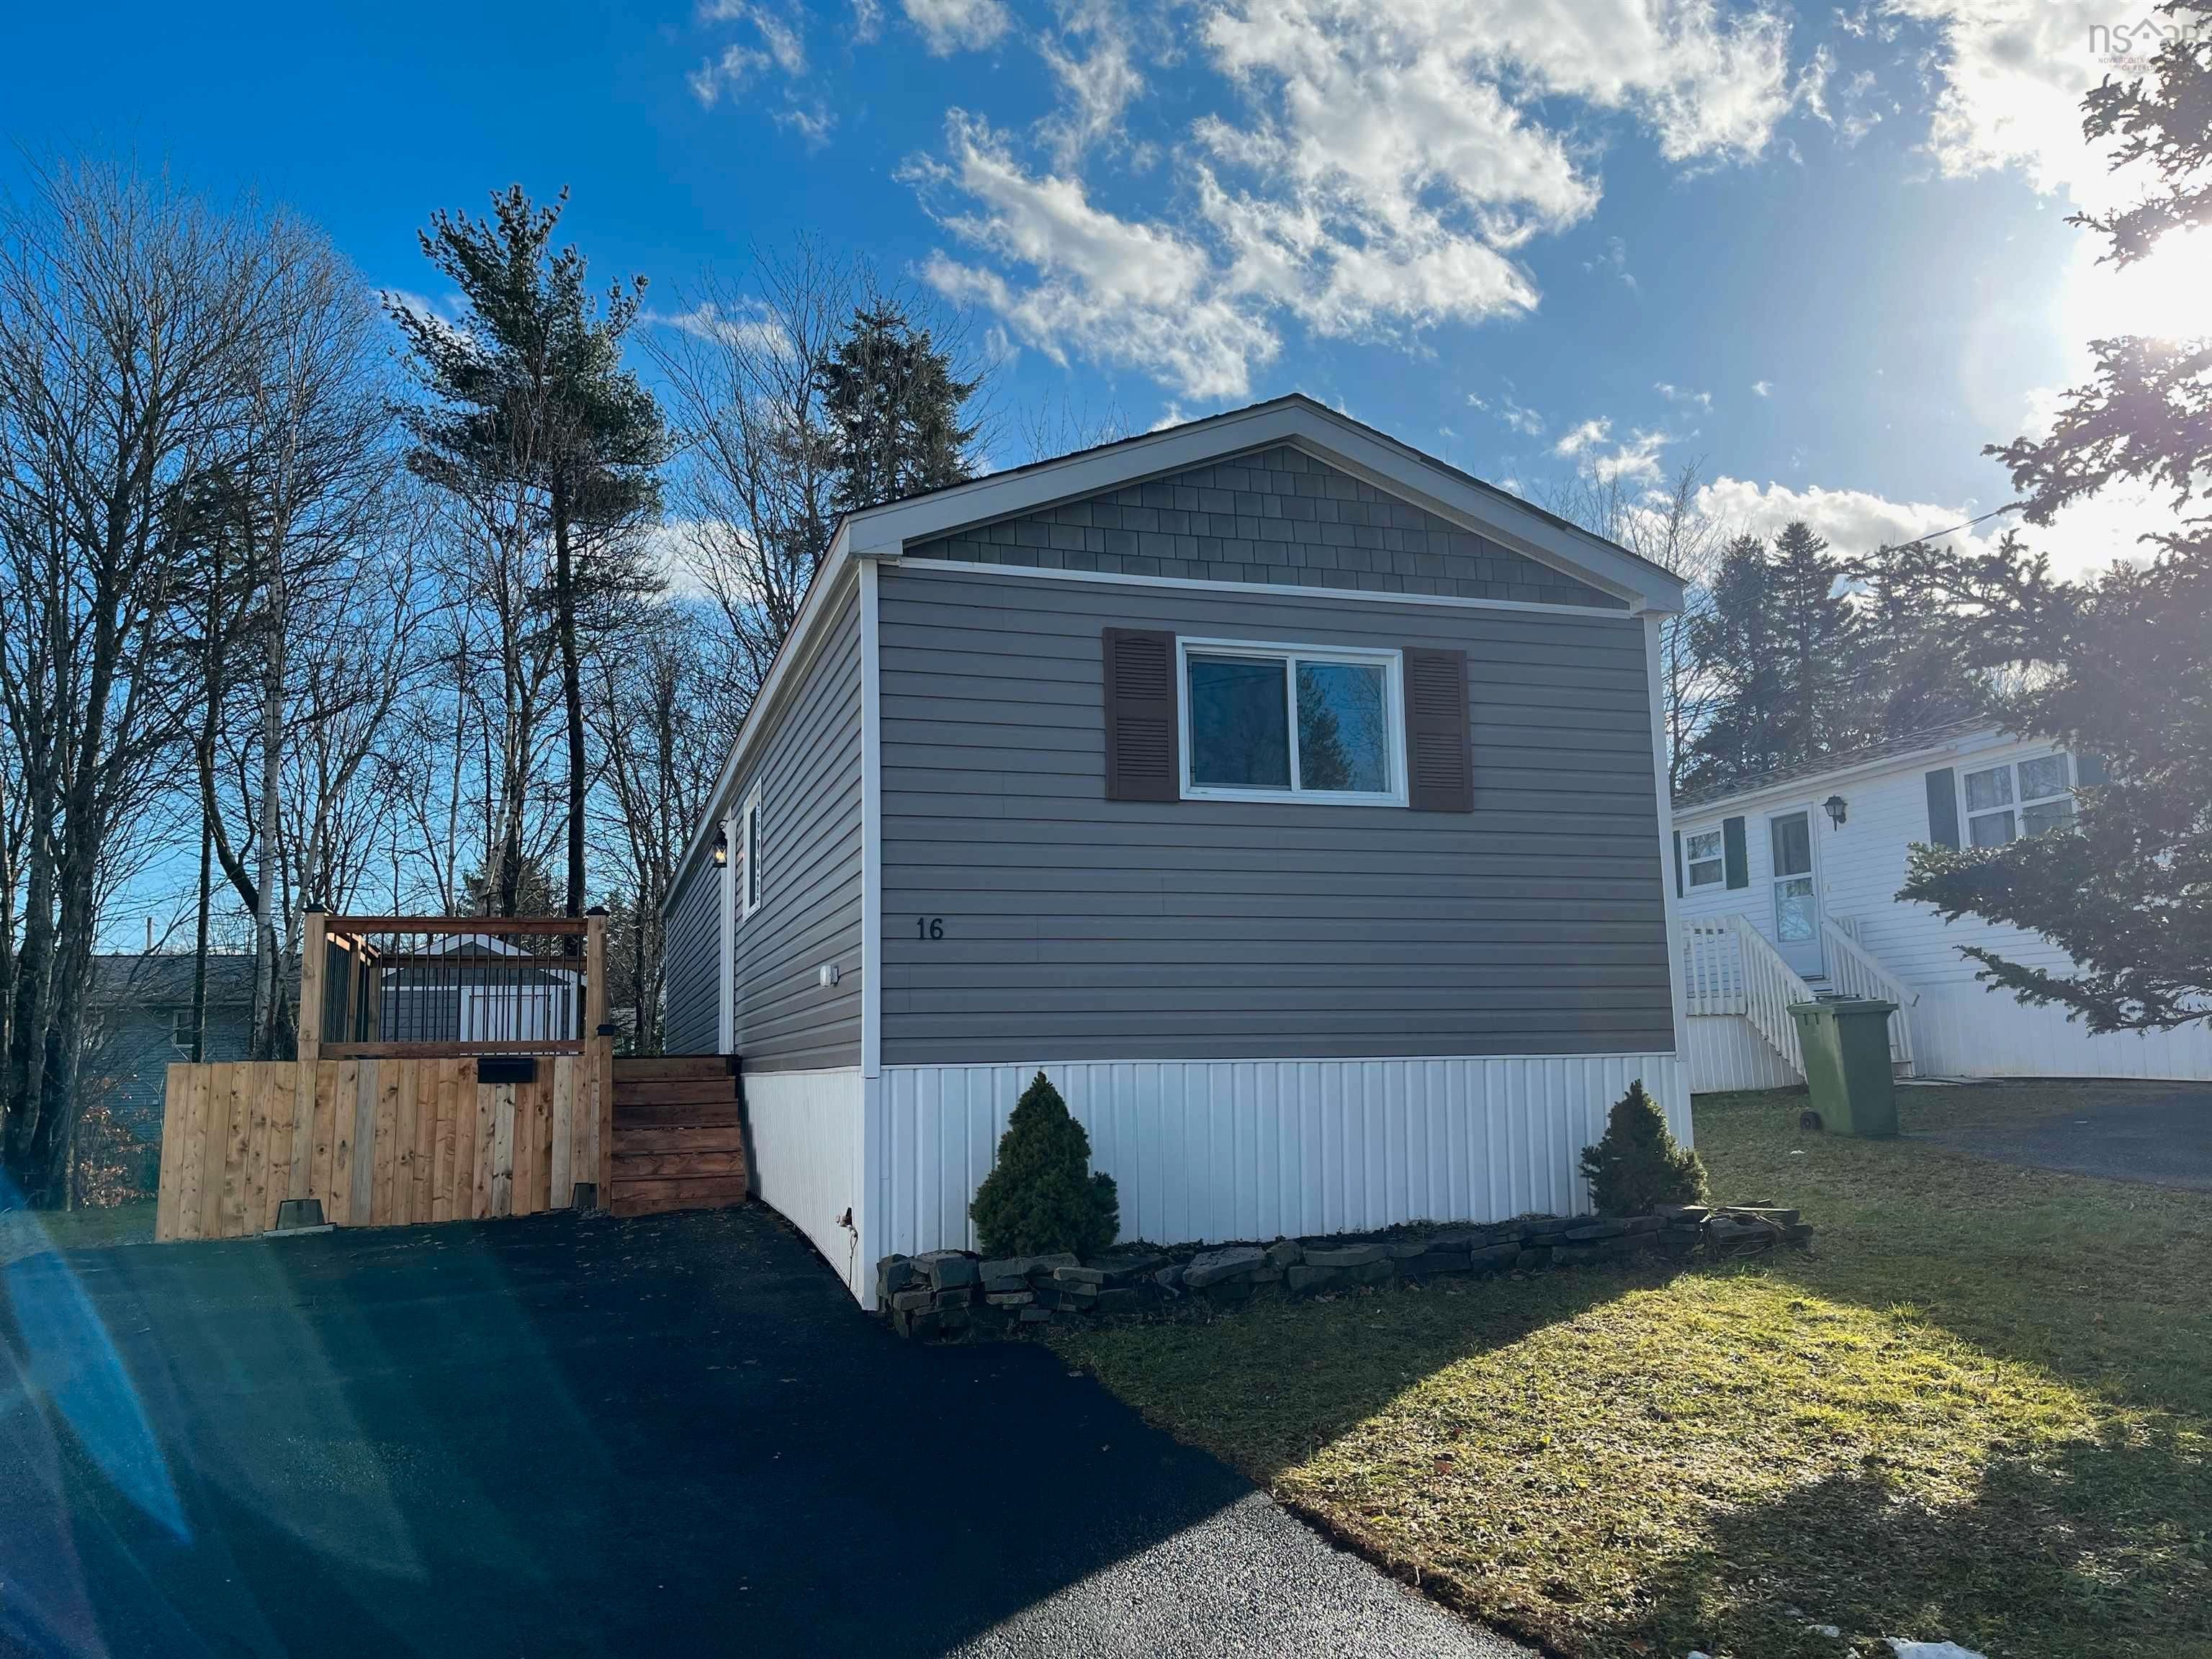 Main Photo: 16 Hughes Drive in Middle Sackville: 25-Sackville Residential for sale (Halifax-Dartmouth)  : MLS®# 202129727